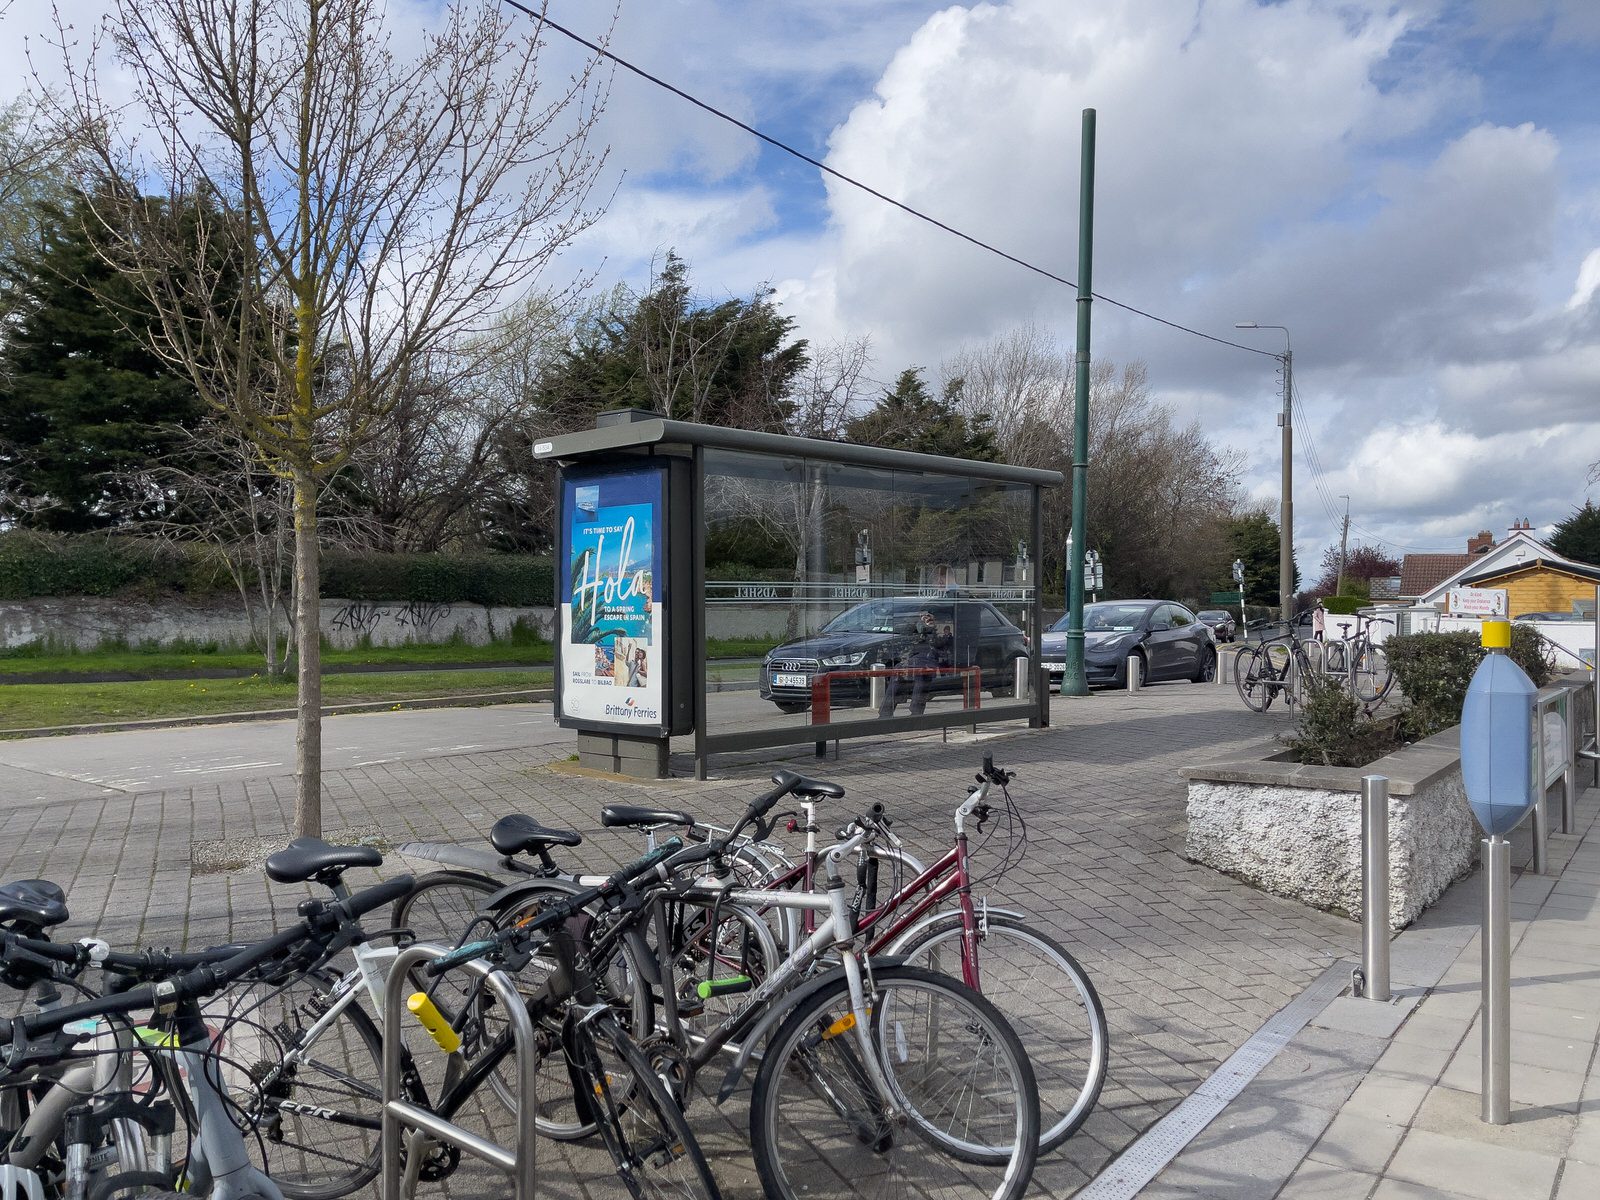 THE LUAS TRAM STOP AT WINDY ARBOUR AND THE IMMEDIATE AREA 030